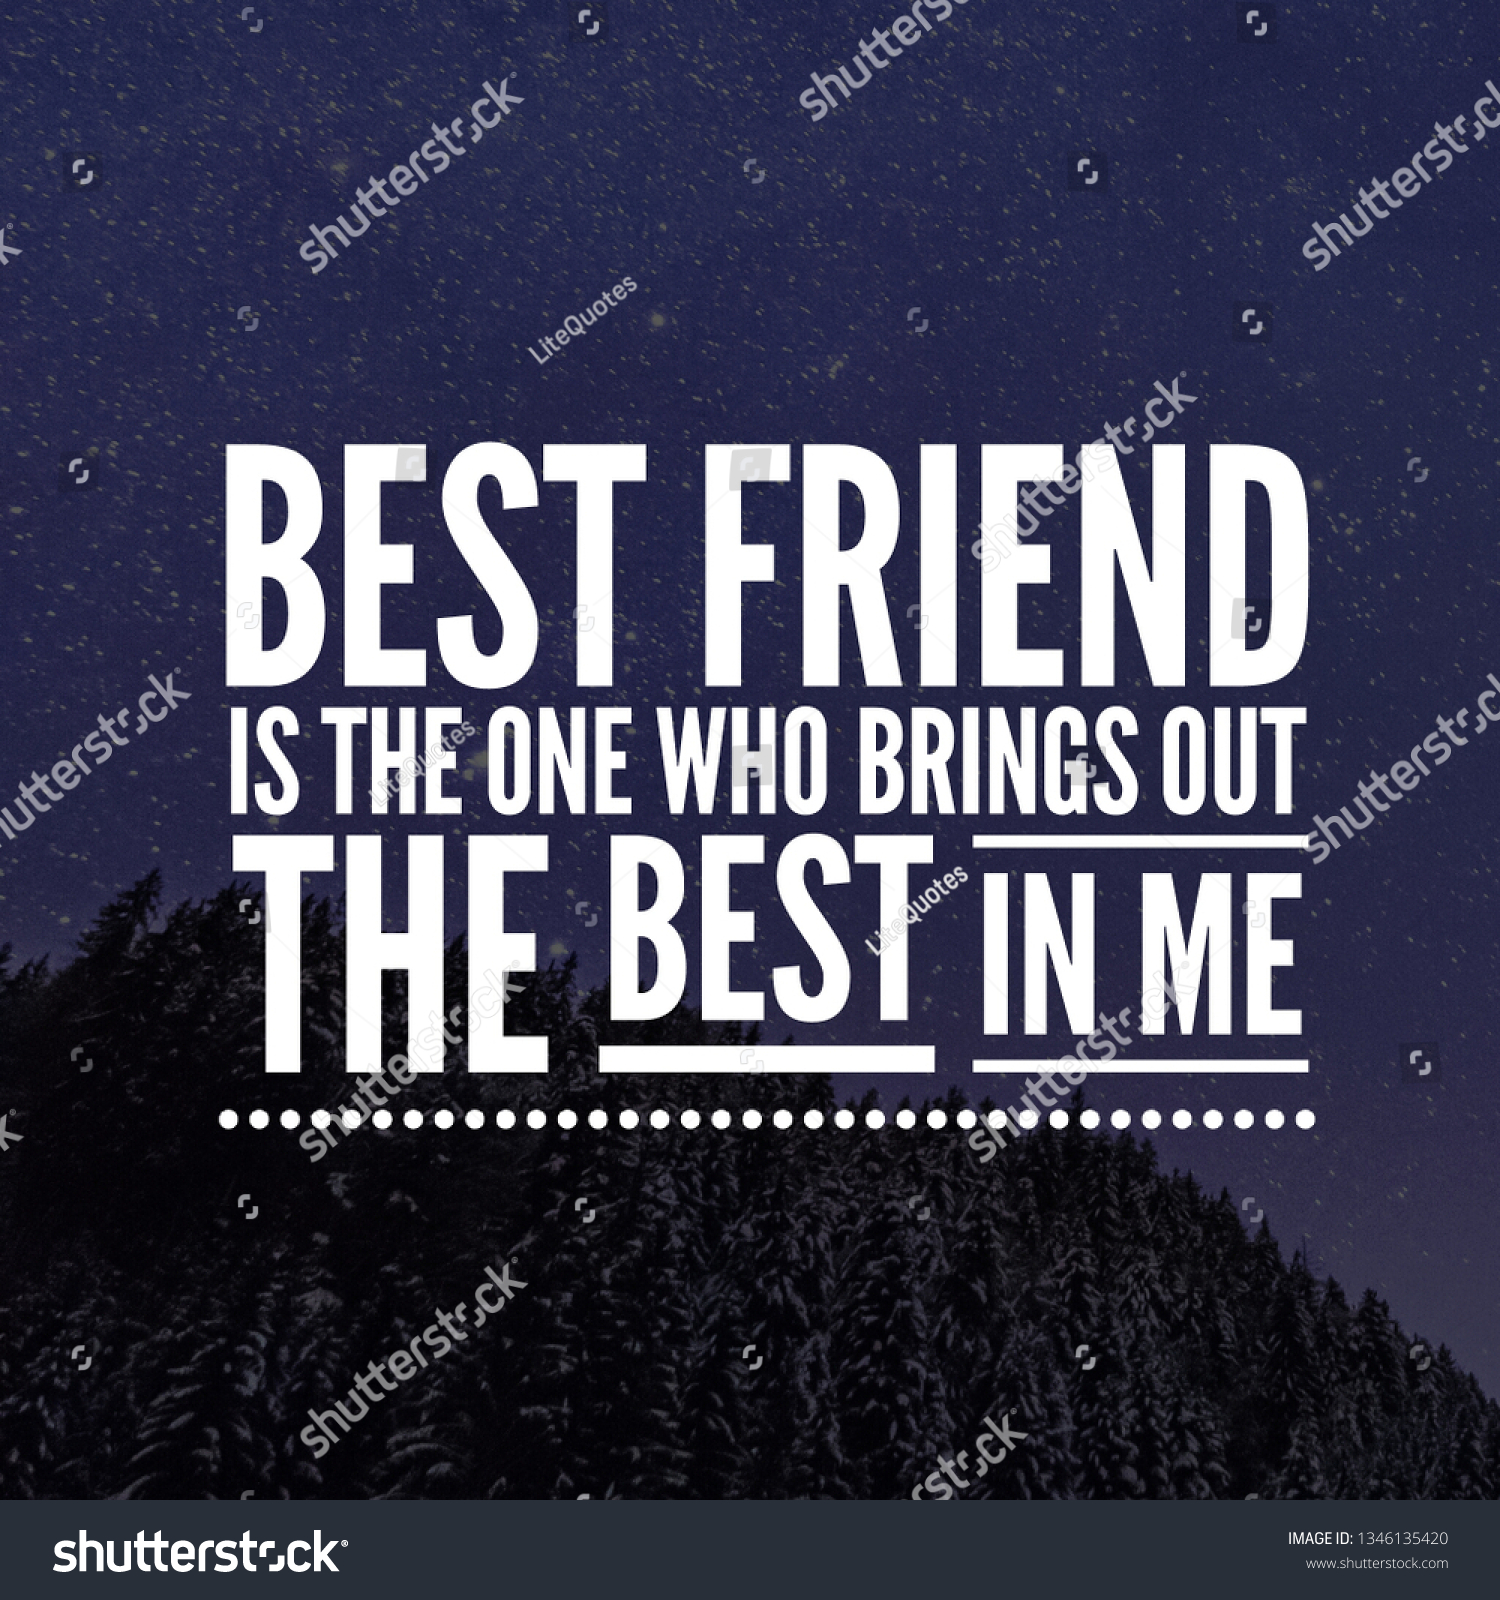 Happy Friendship Day, Quotes For Friendship Day, Friendship Quotes, Motivational Quotes On Friendship #1346135420